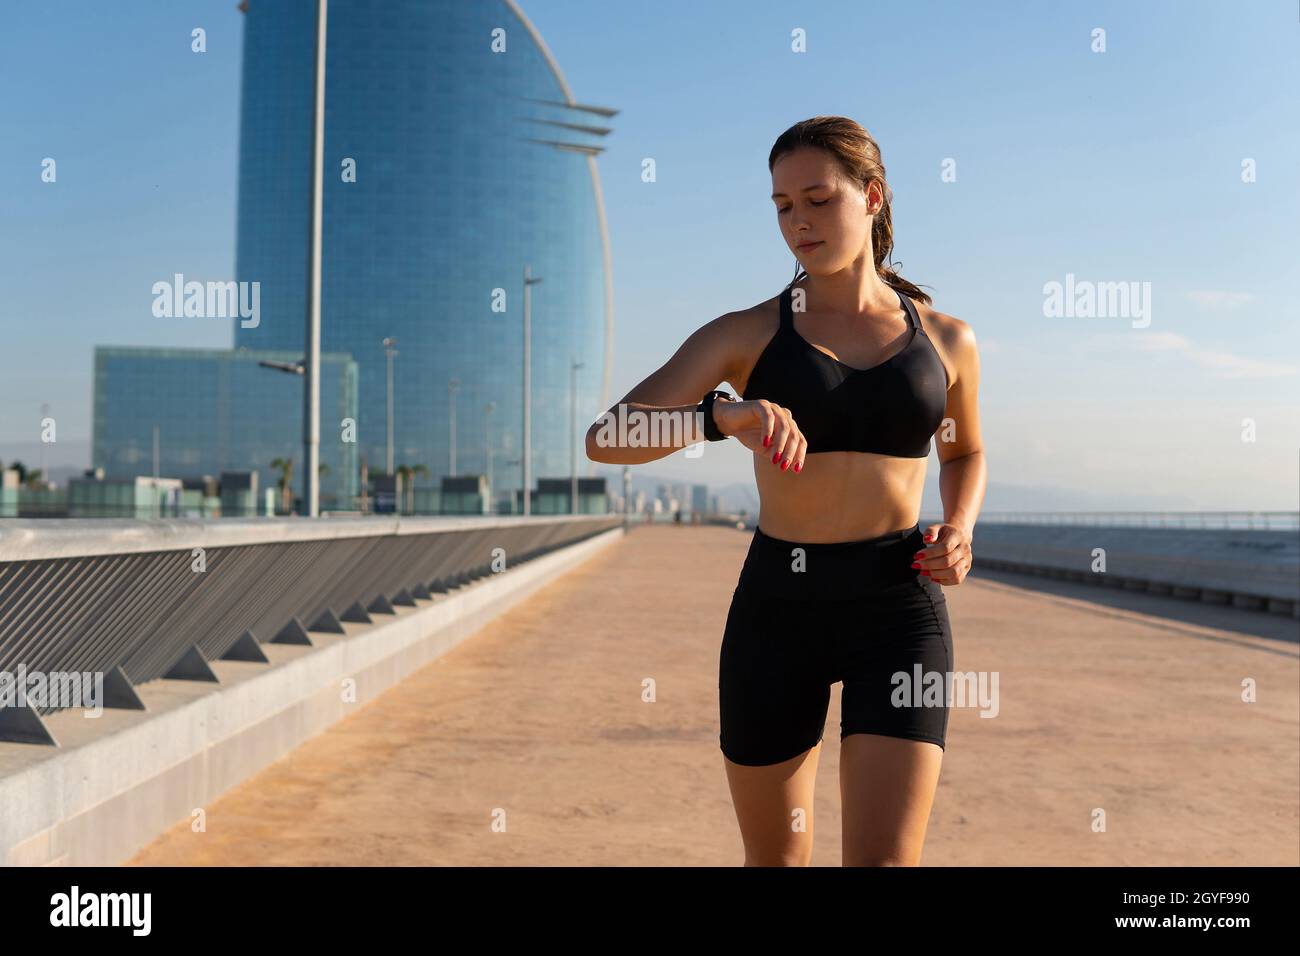 Fit sportswoman in sports bra and shorts running and checking pulse on smart band during cardio workout on embankment in city. Stock Photo